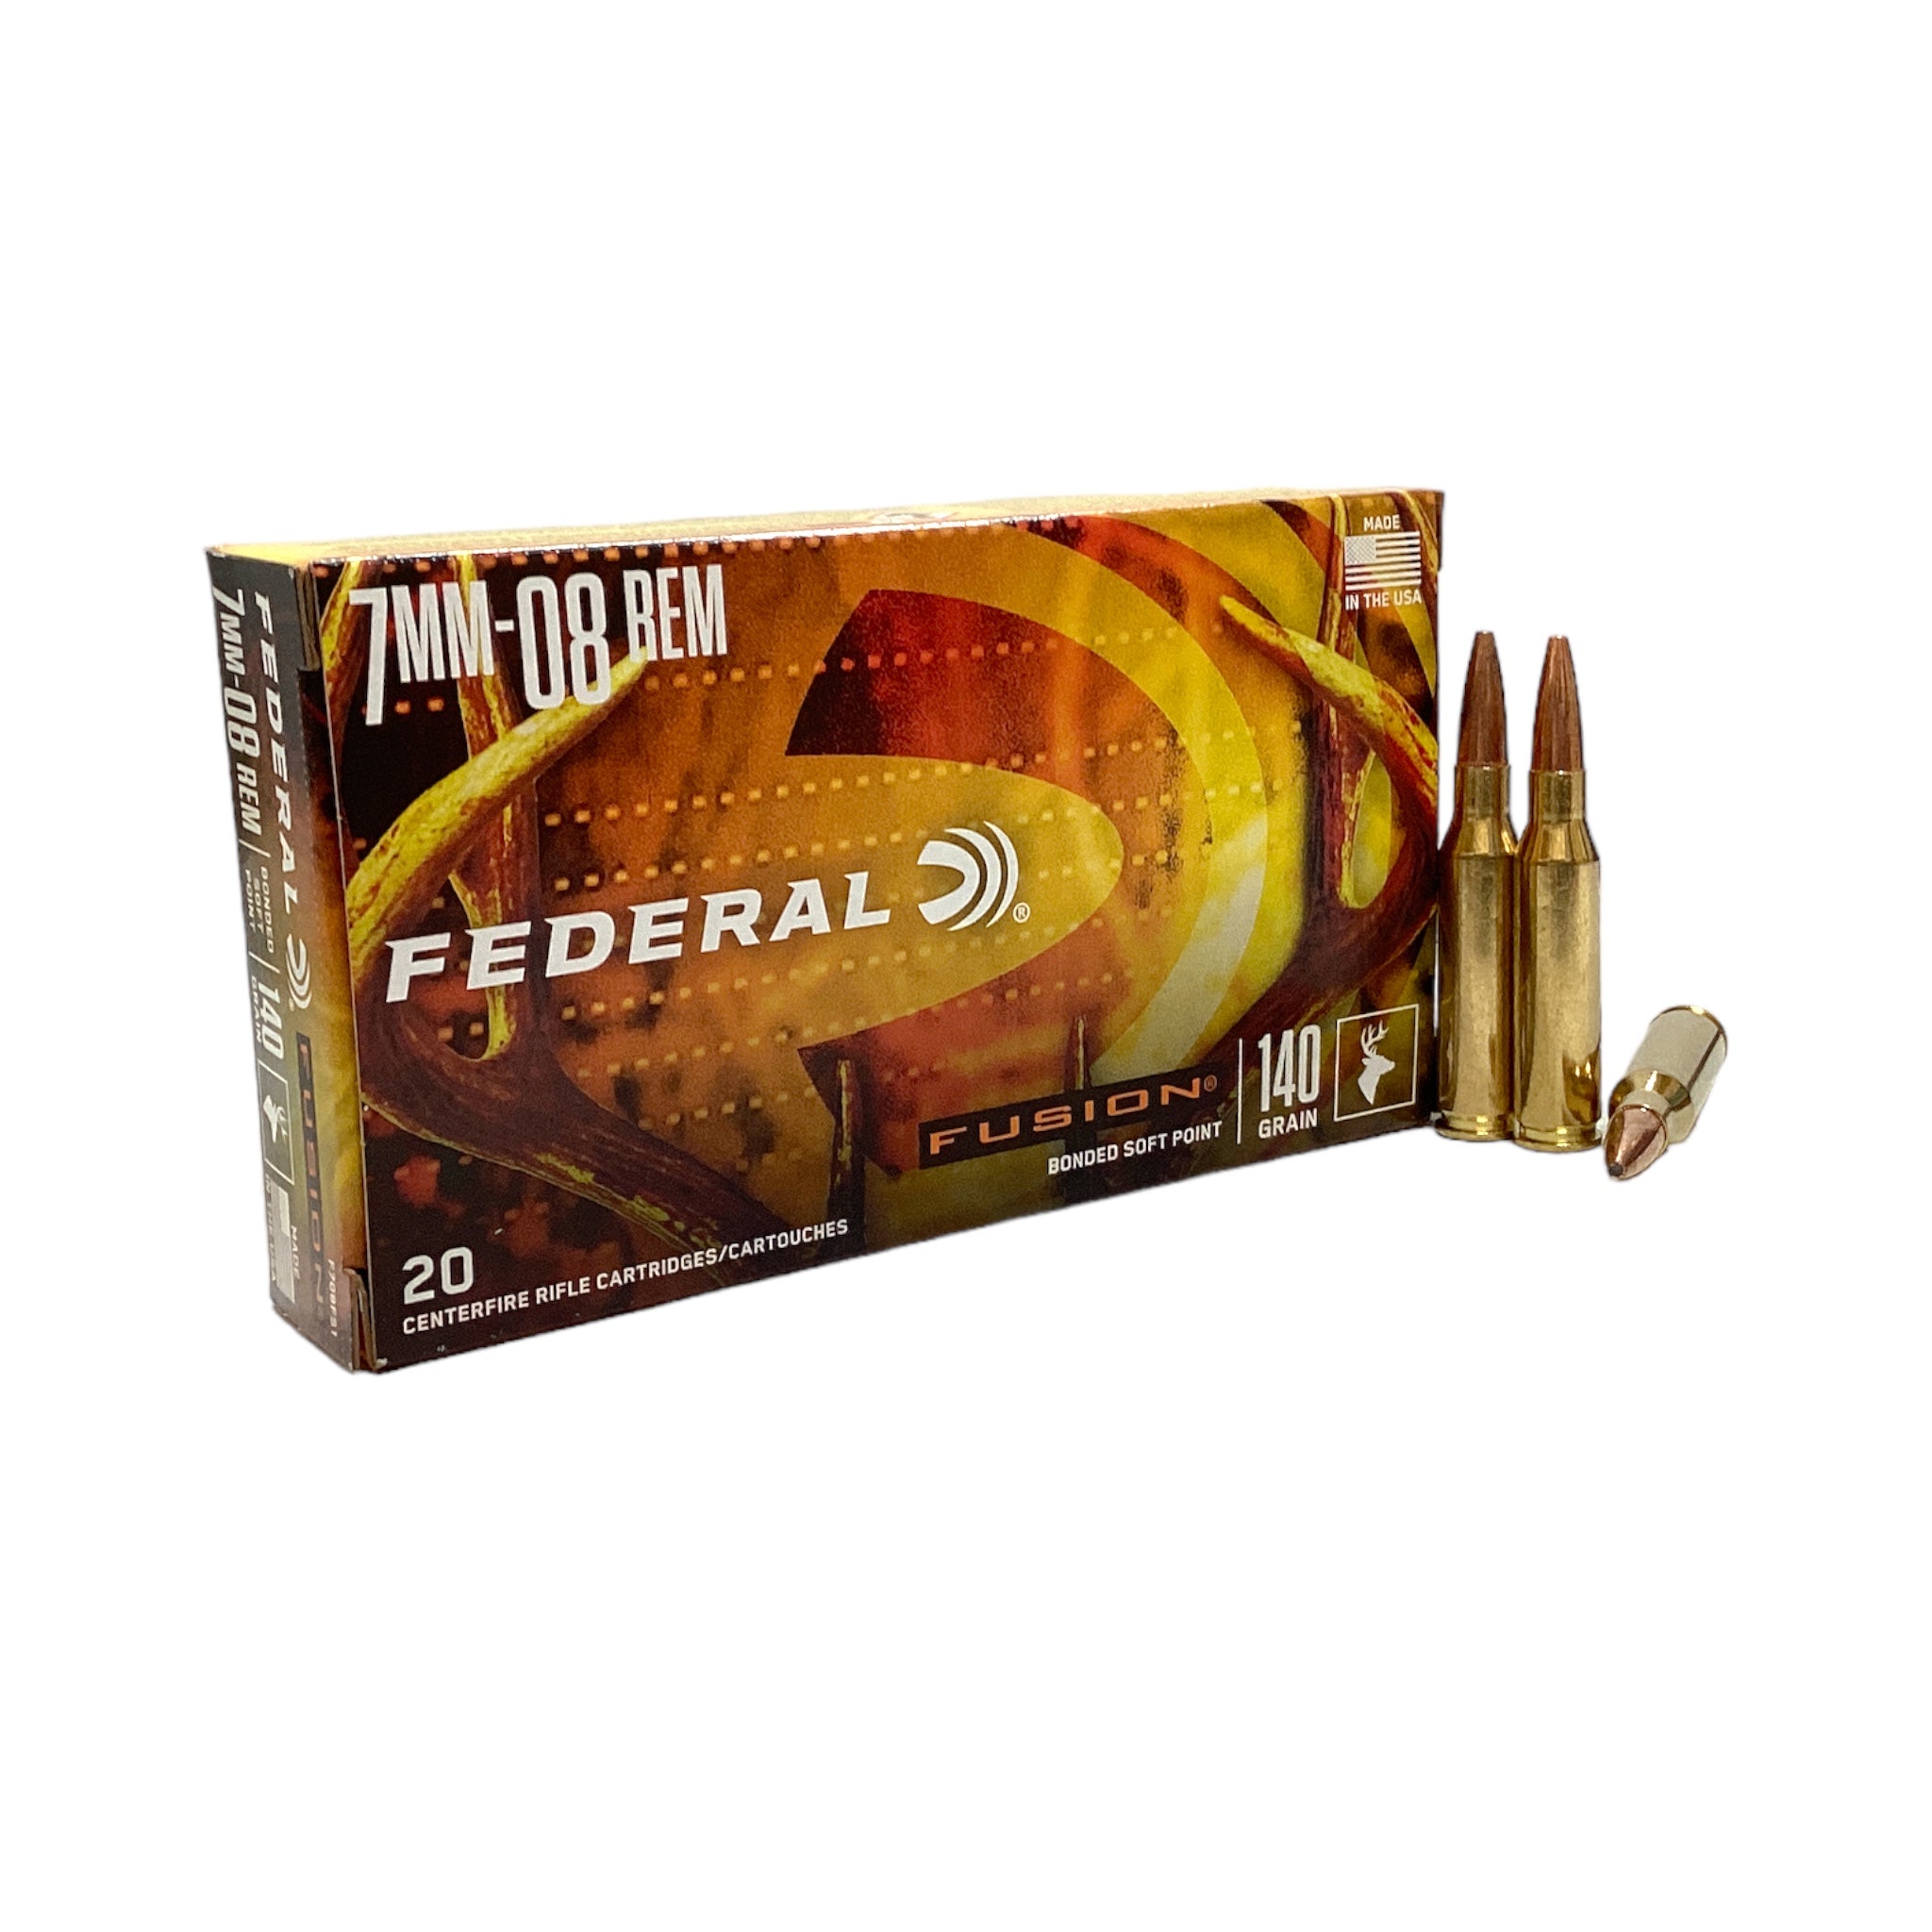 Federal Fusion Bonded SP Ships Immediately Ammo